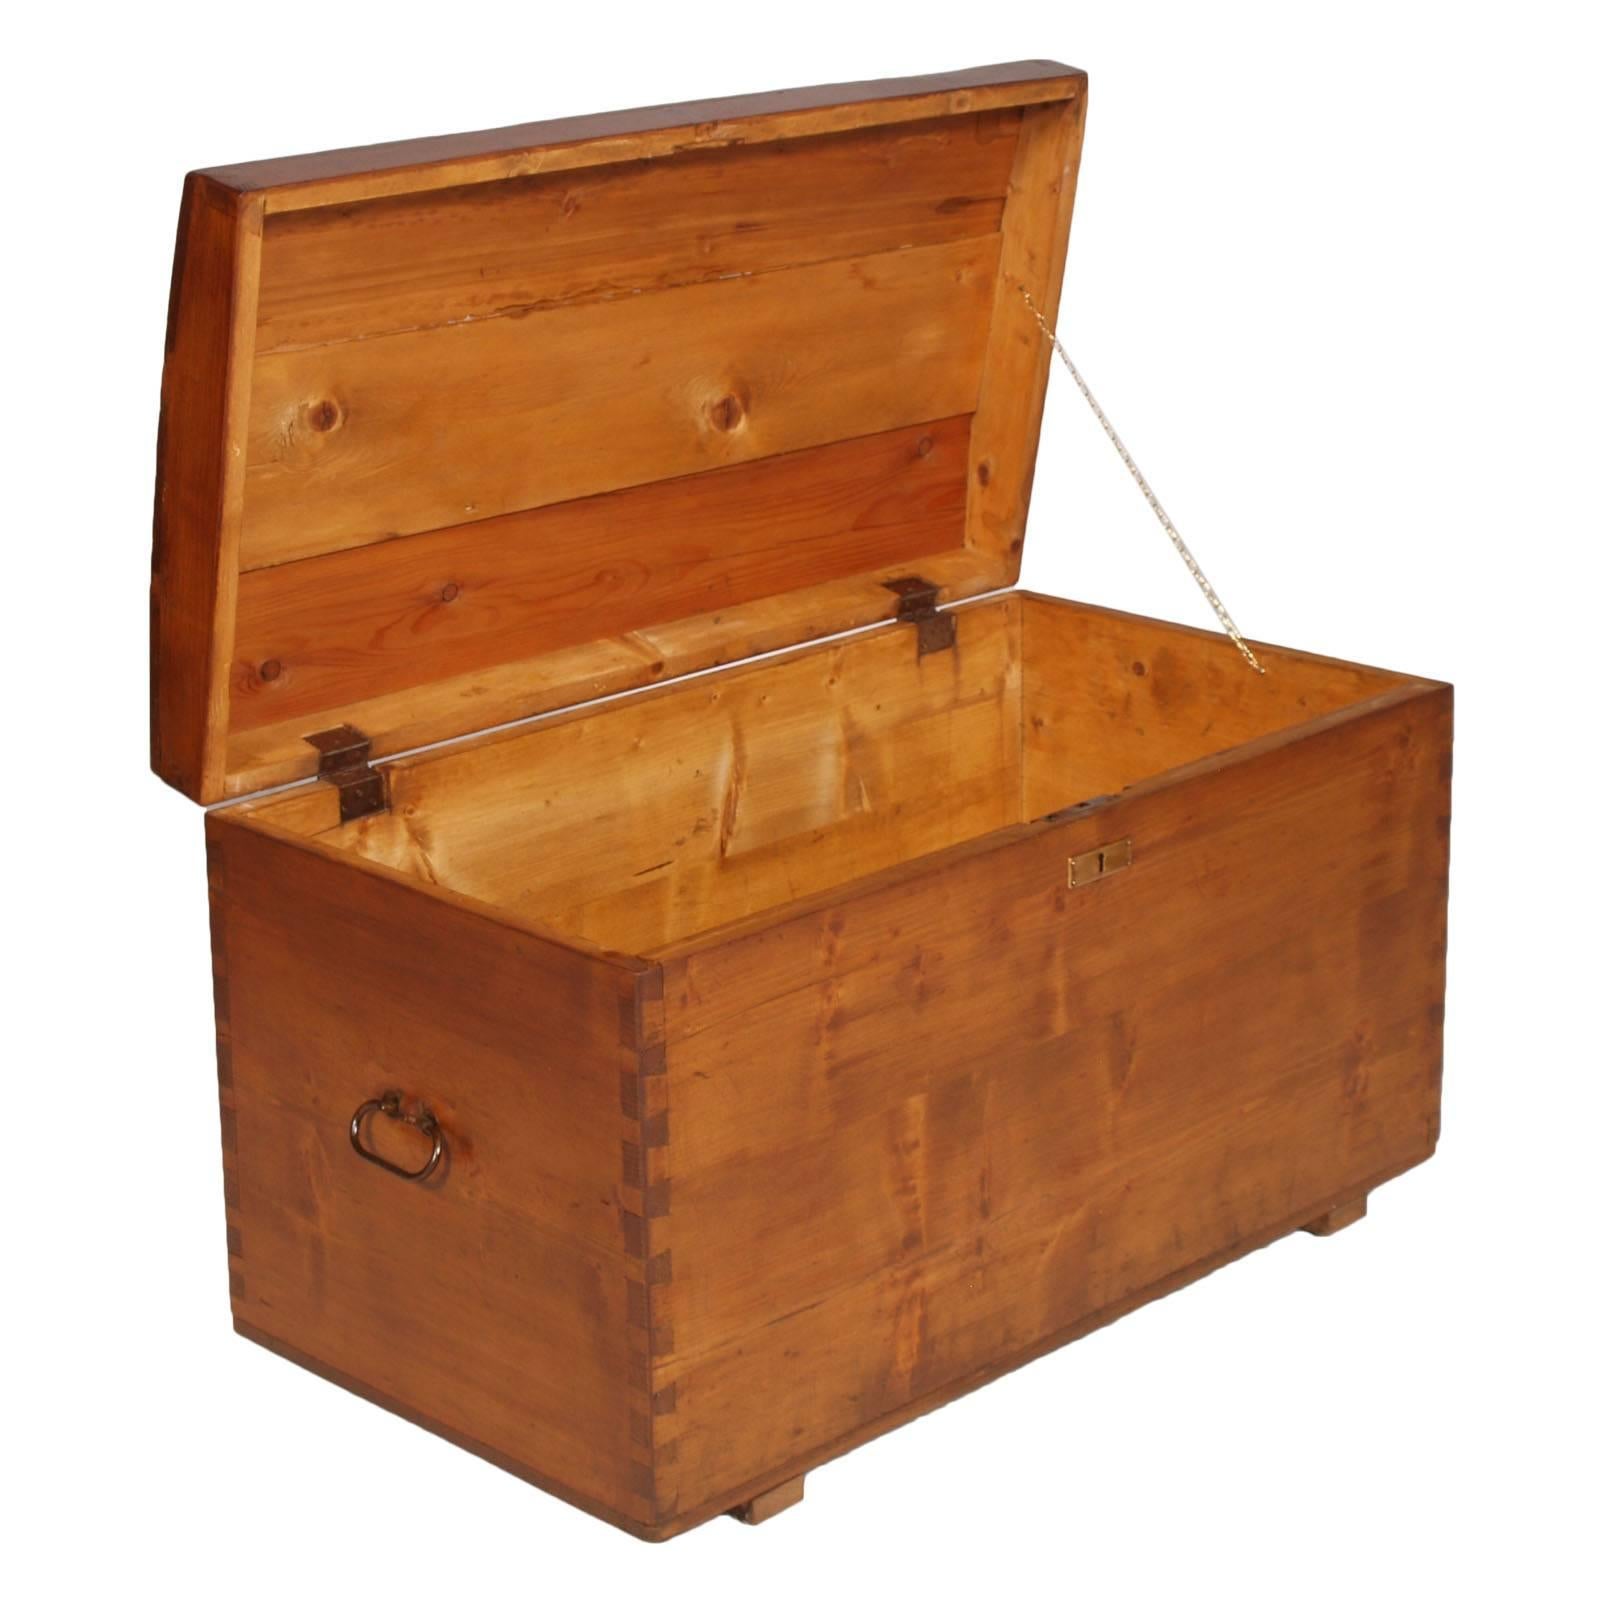 1850s antique country traveling trunk chest in solid pine wood restored and polished to wax

Measures cm: H 57 x W 100 x D 52.